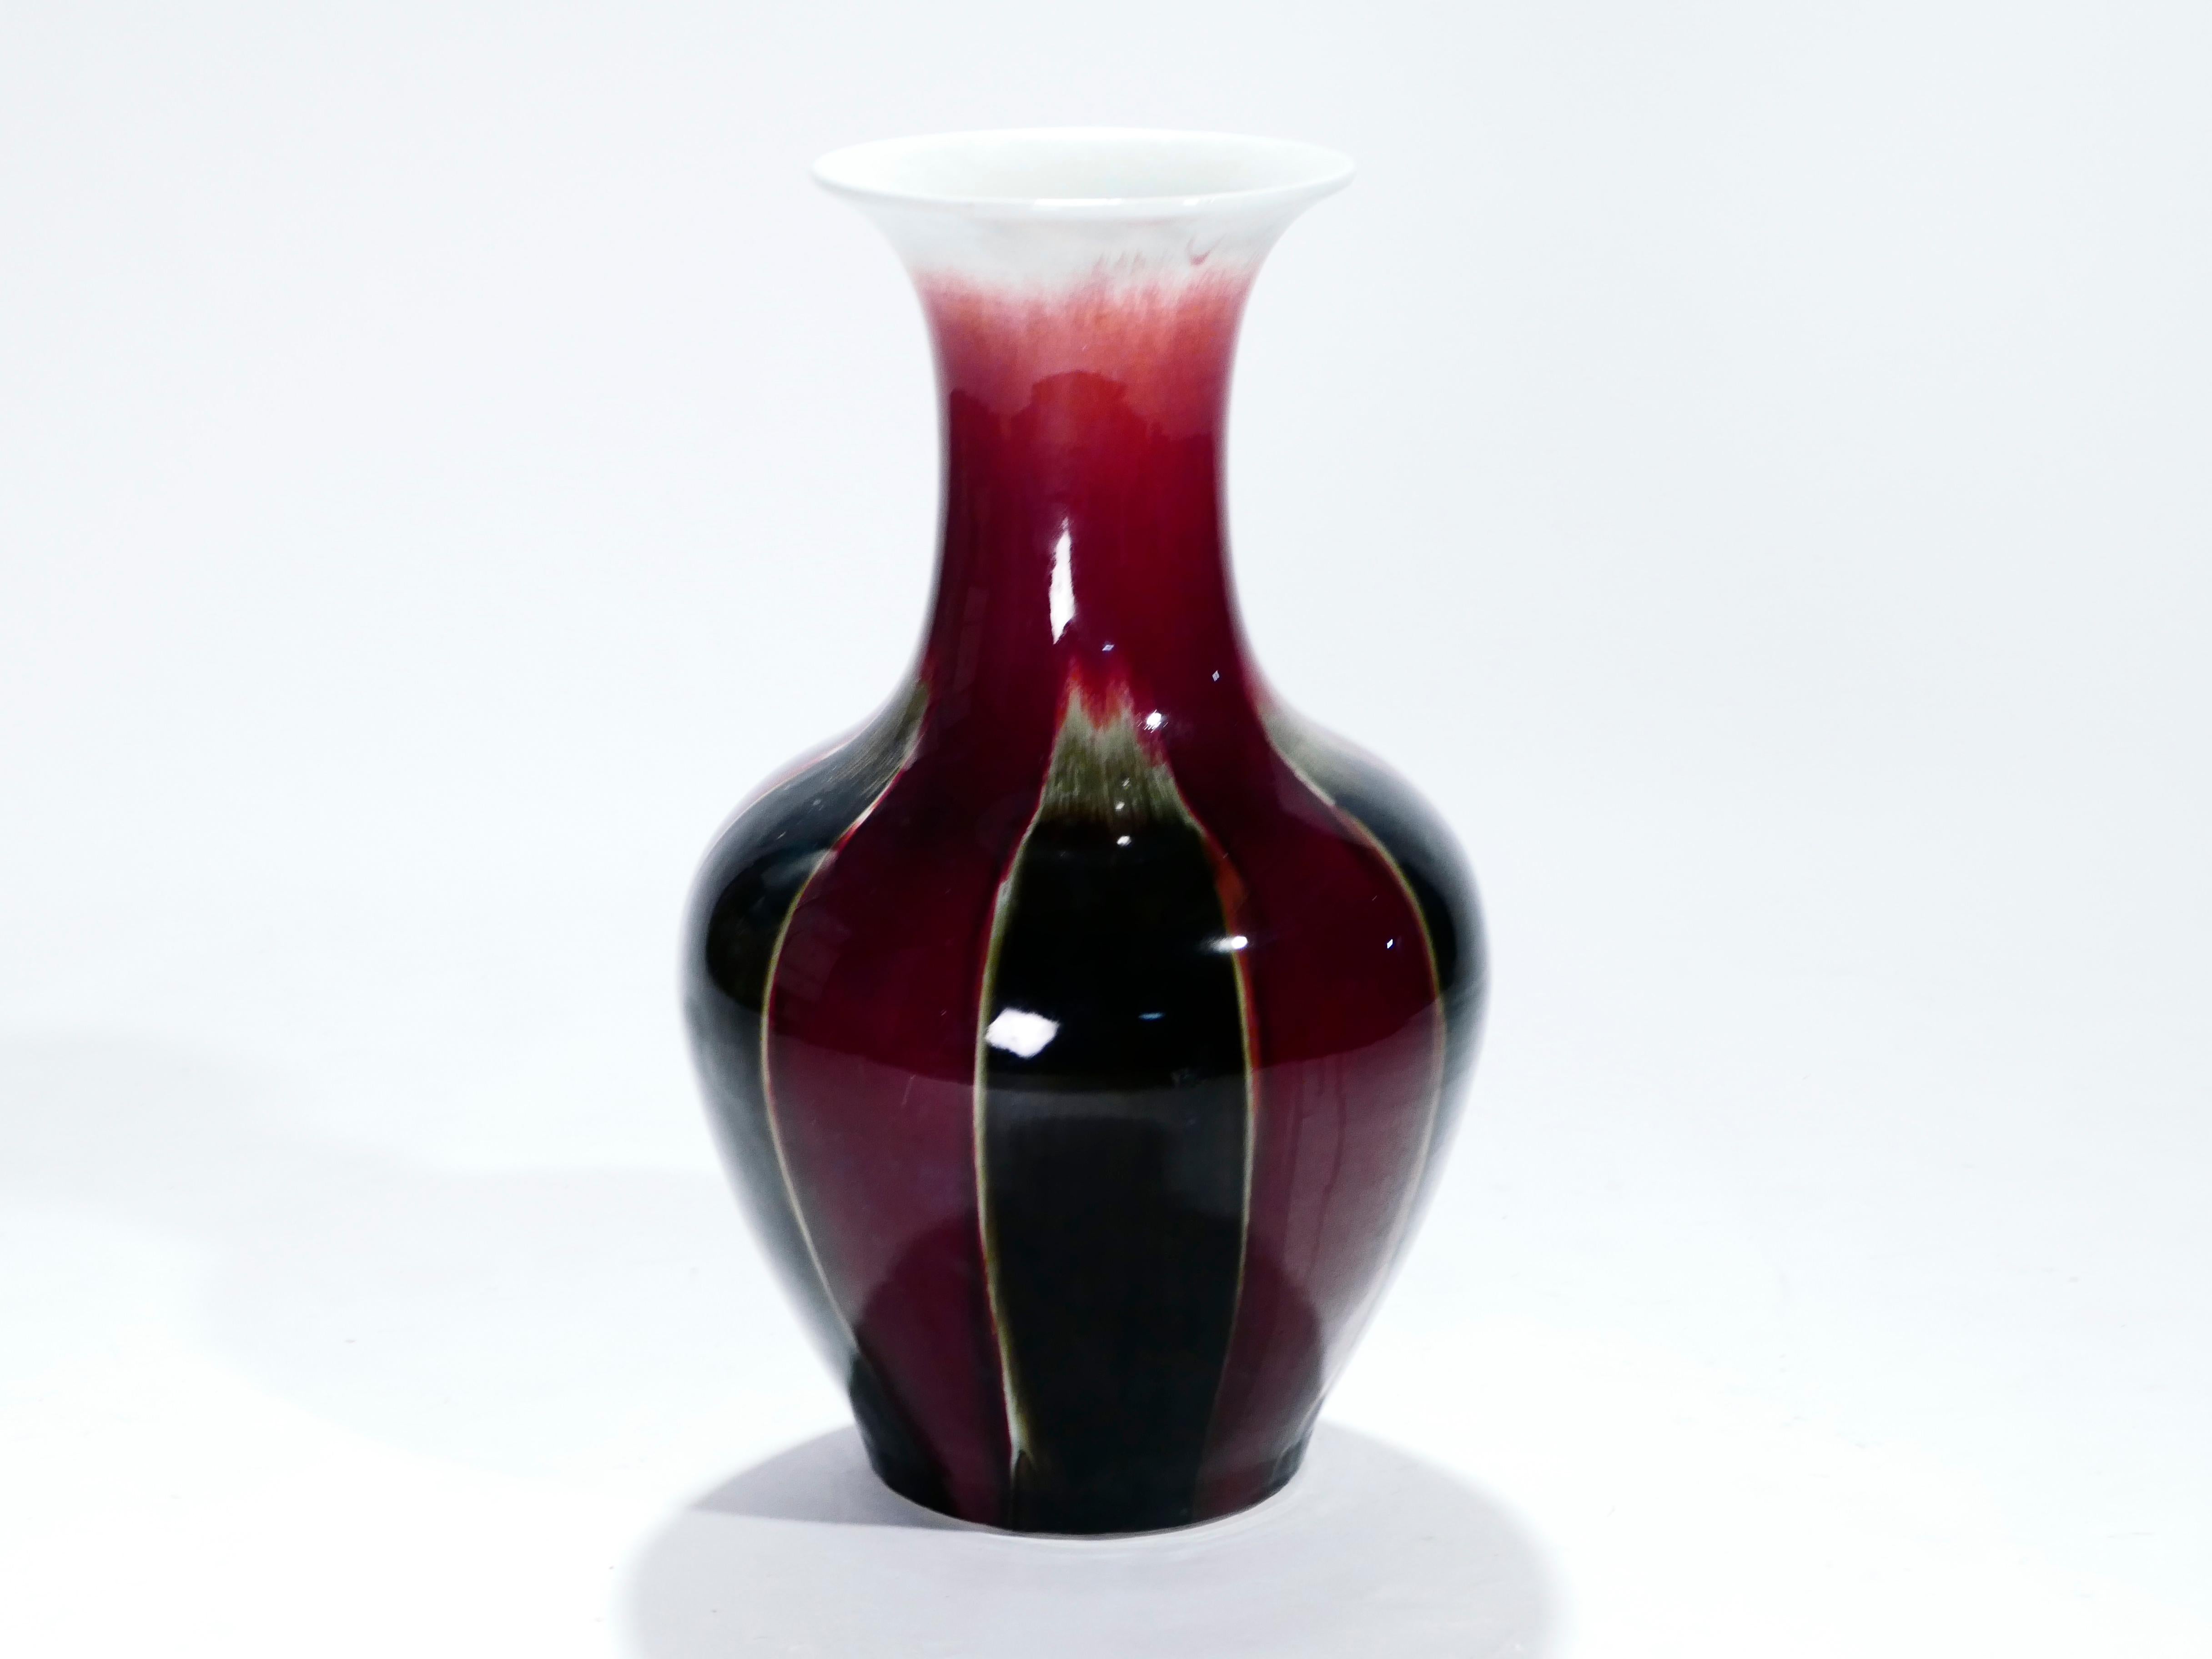 At 67 cms - 26.5 inches tall, this curved vase would be imposing in any space. It was created in the 1960s by a French ceramicist with an ample body and energetic trumpet neck. The rich colors err on the side of dark. Sang de boeuf, or flambé glaze,